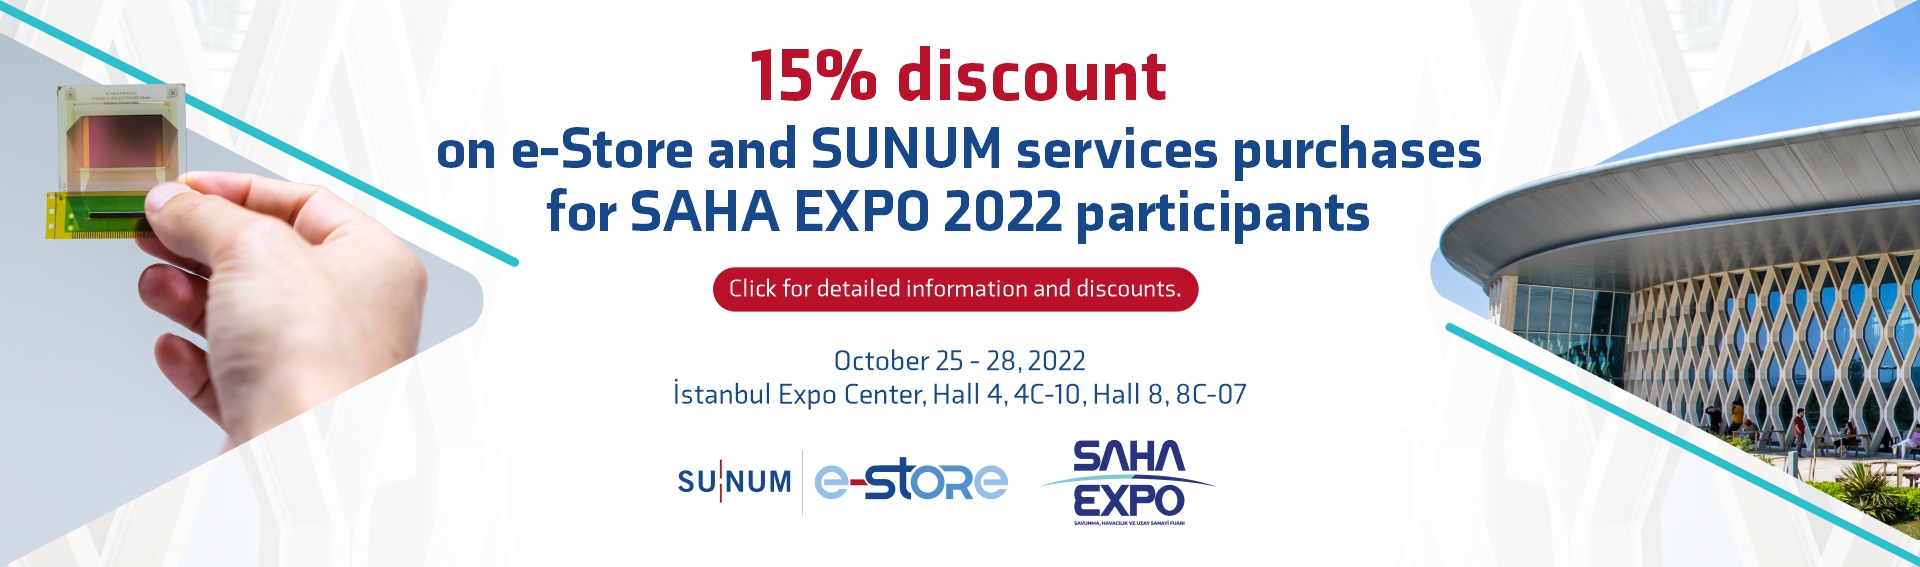 15% discount on e-Store and SUNUM services purchases for SAHA EXPO 2022 participants